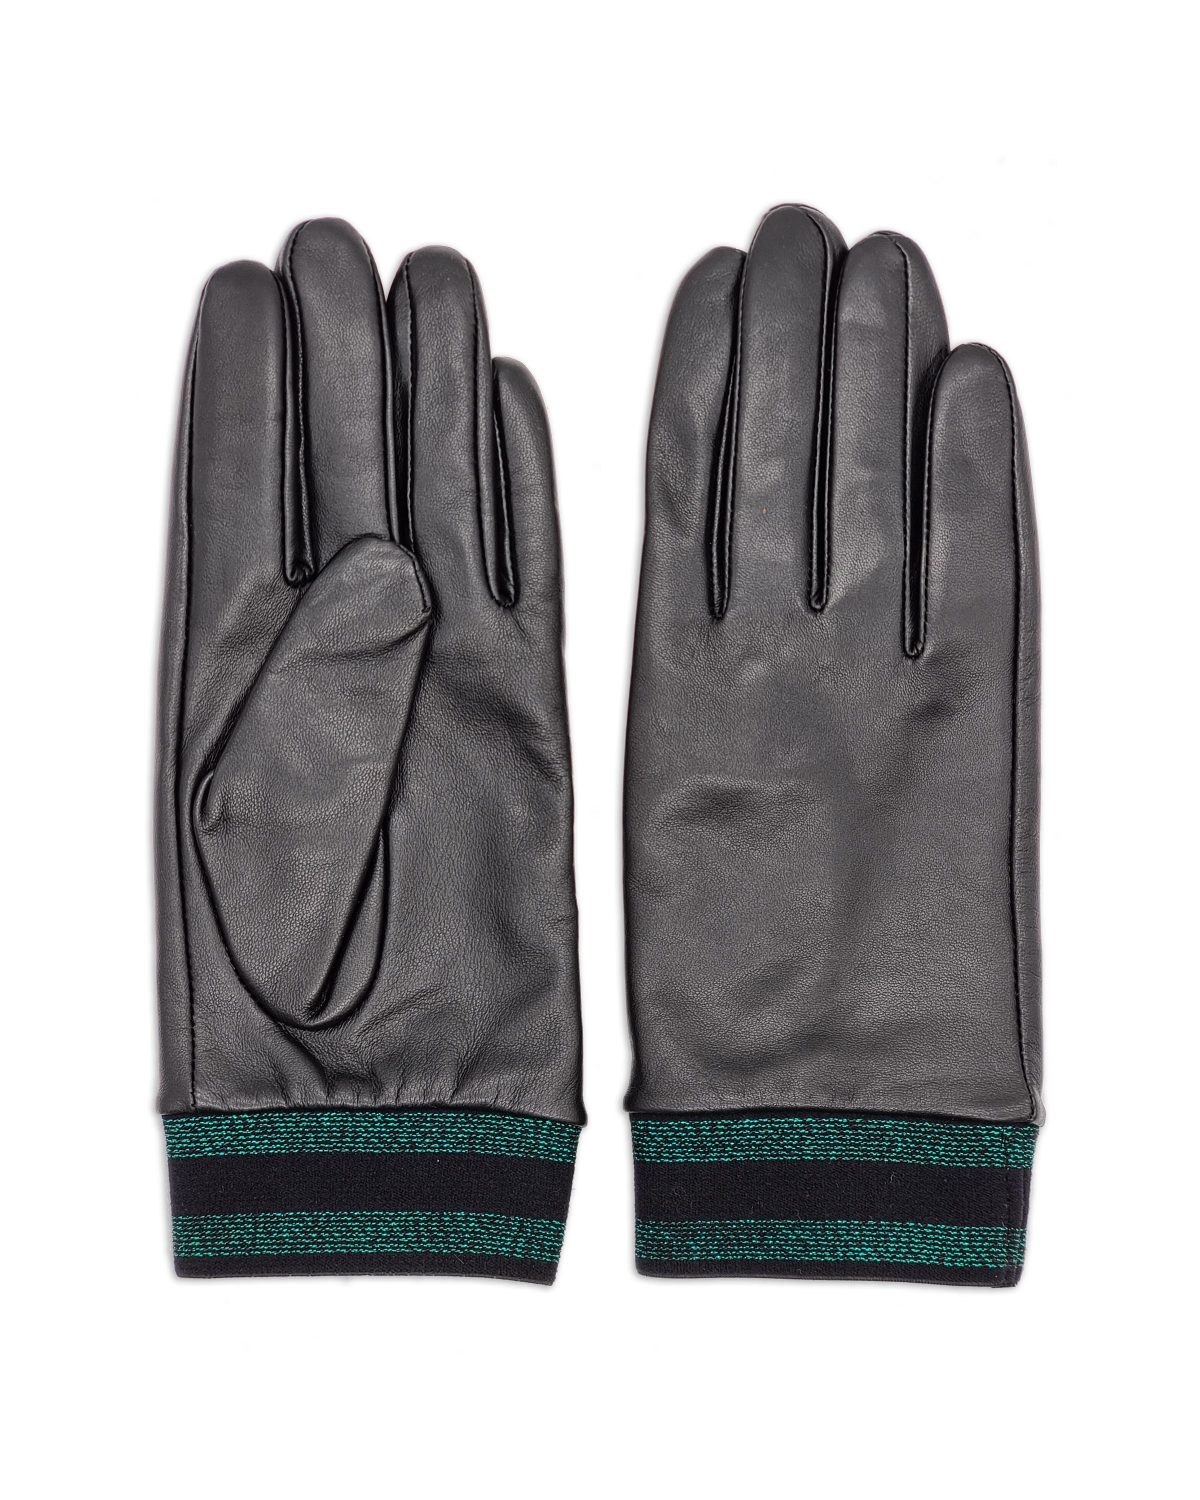 Black and Green Gloves